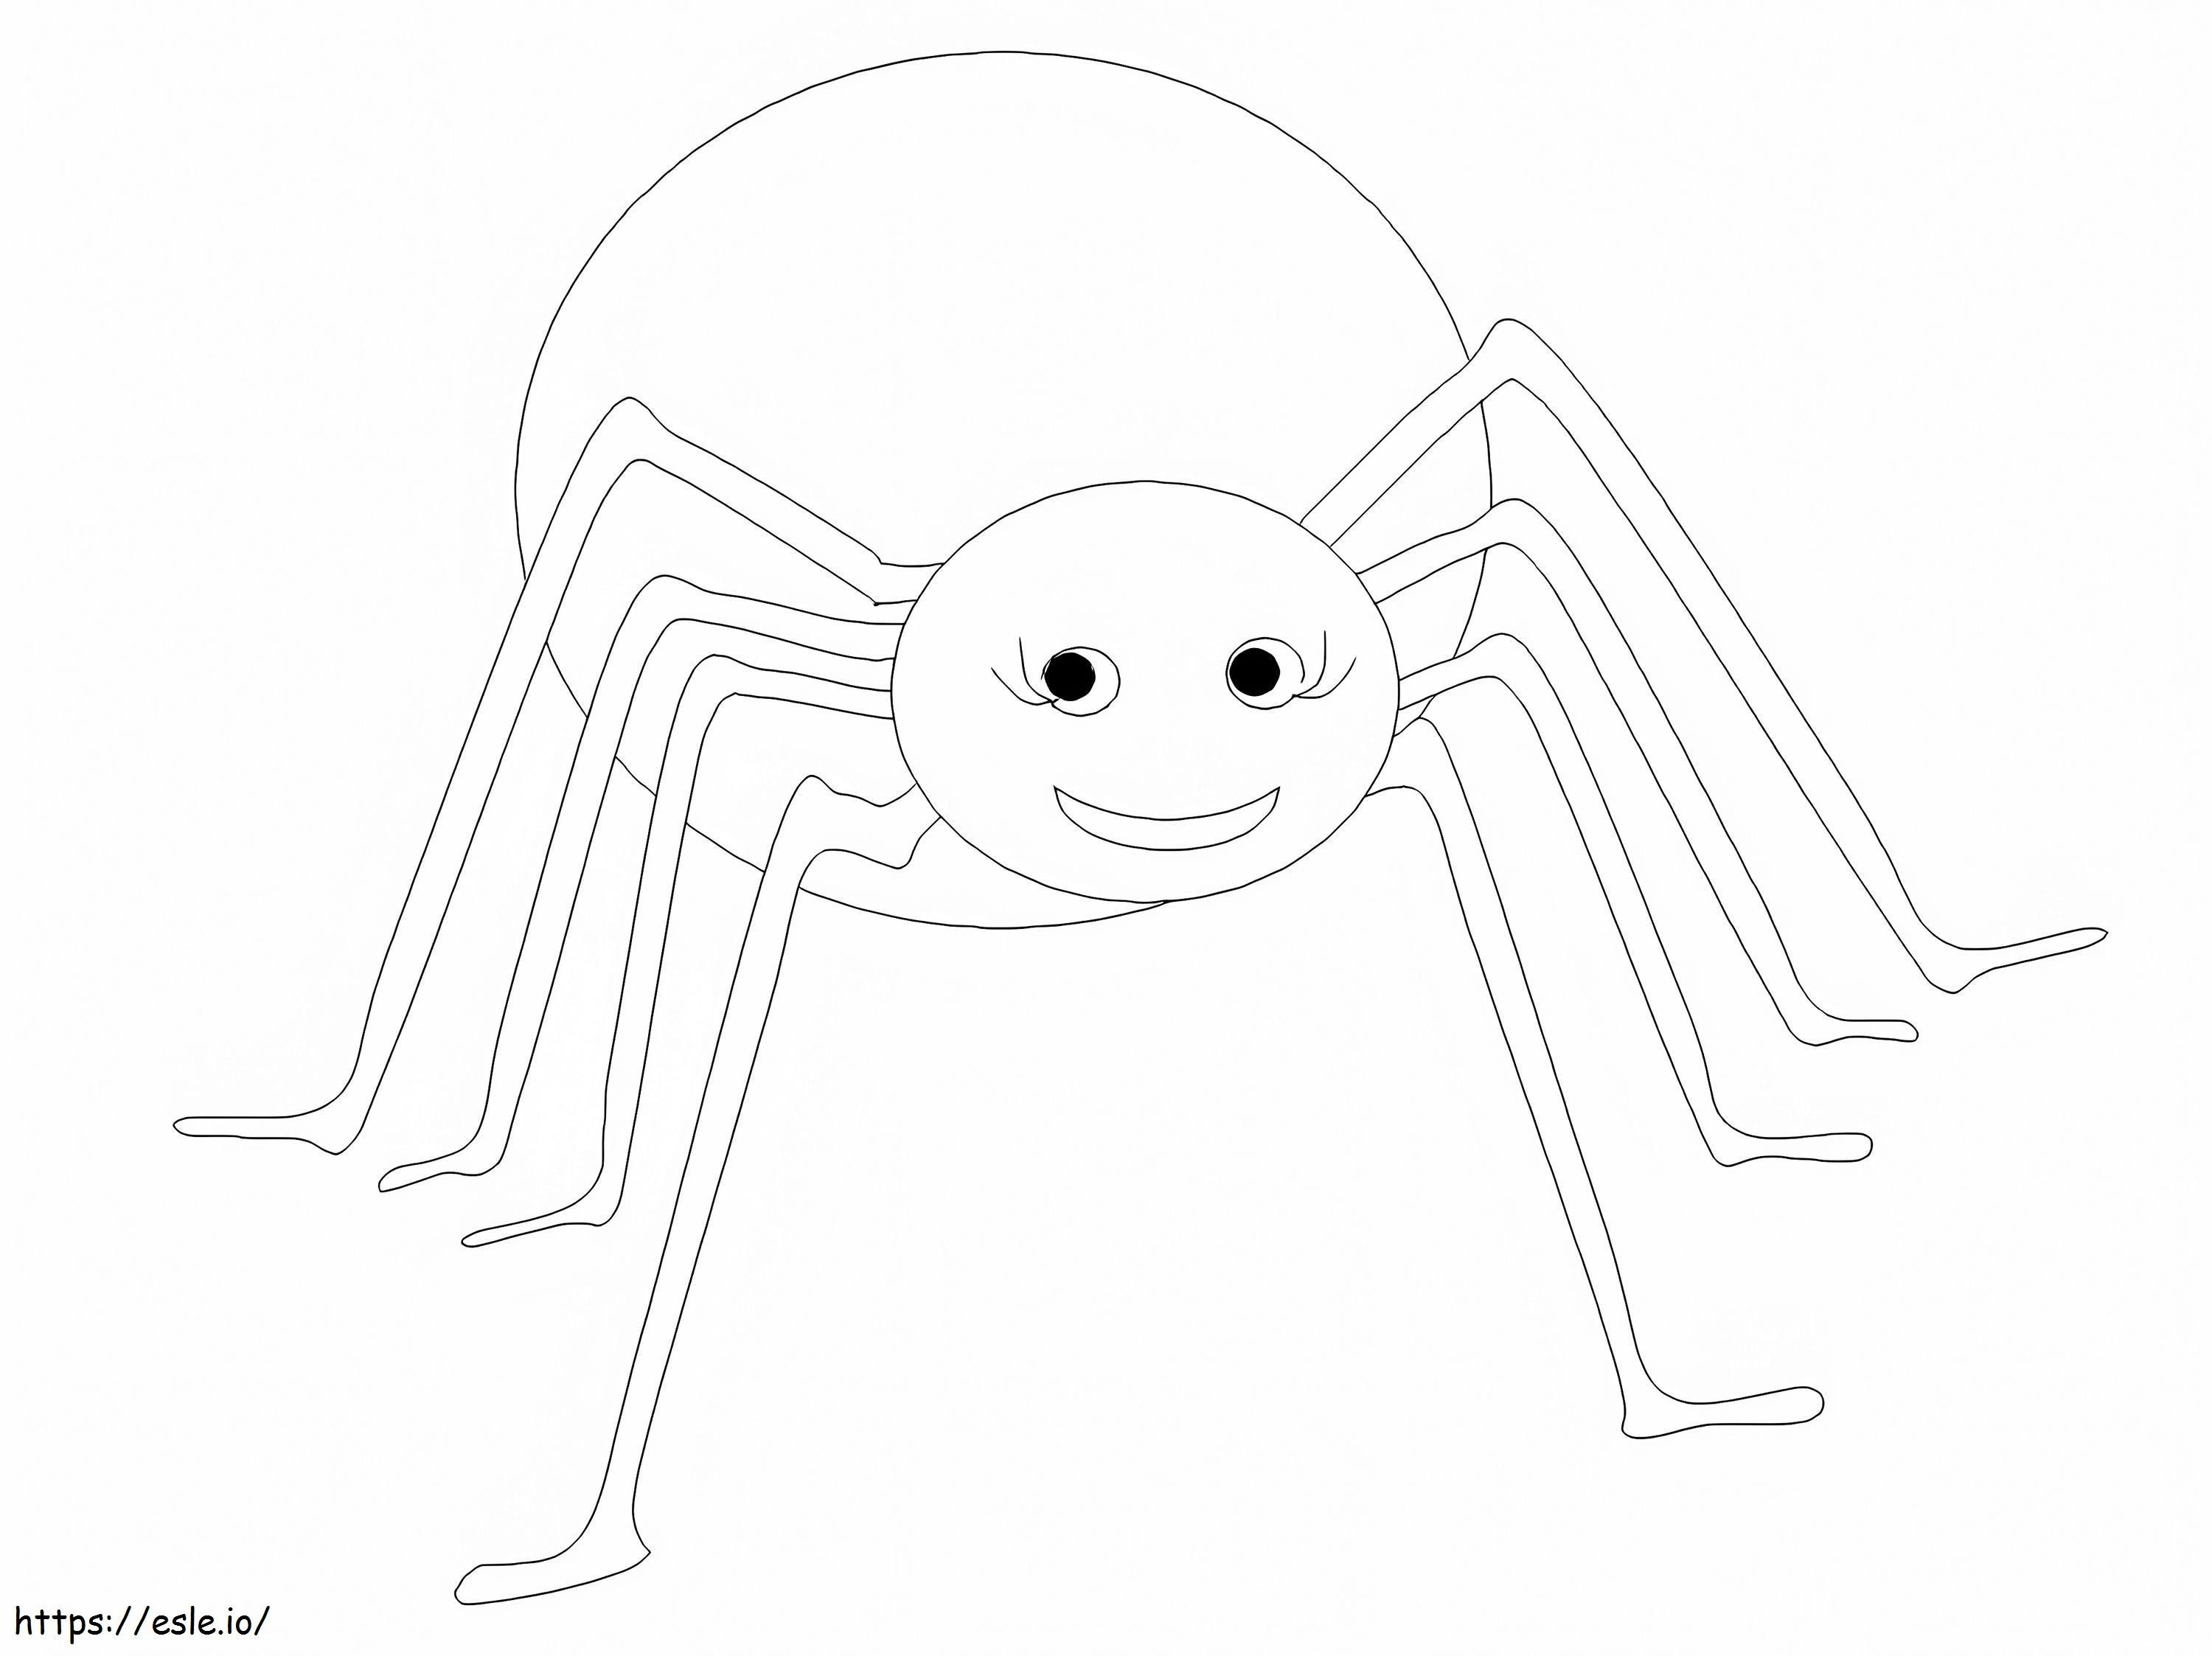 Spider 7 coloring page